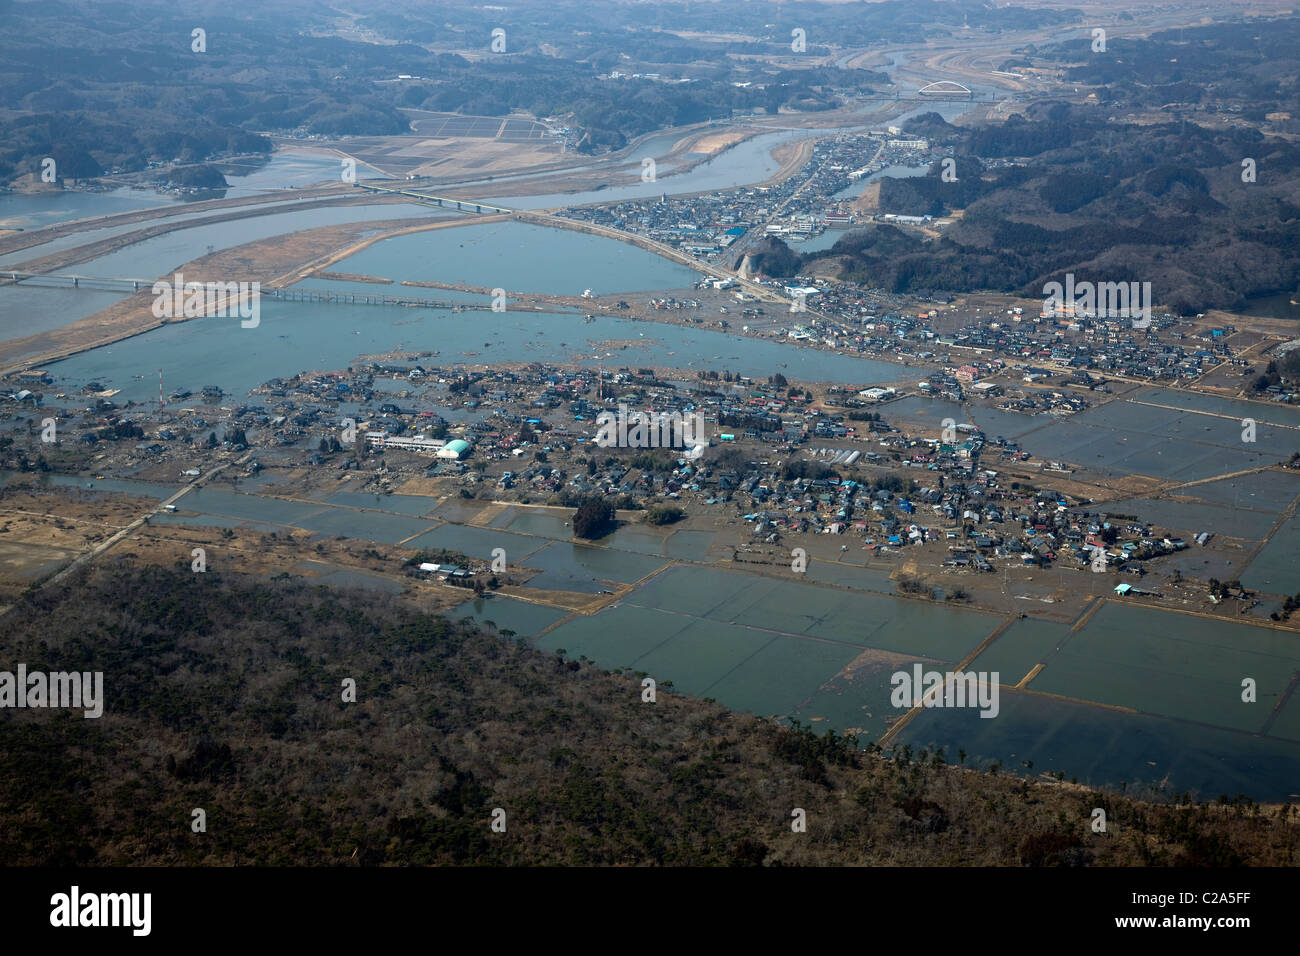 Aerial view of damage to Higashimatsushima, Miyagi Prefecture after a 9. 0 magnitude earthquake and subsequent tsunami Stock Photo